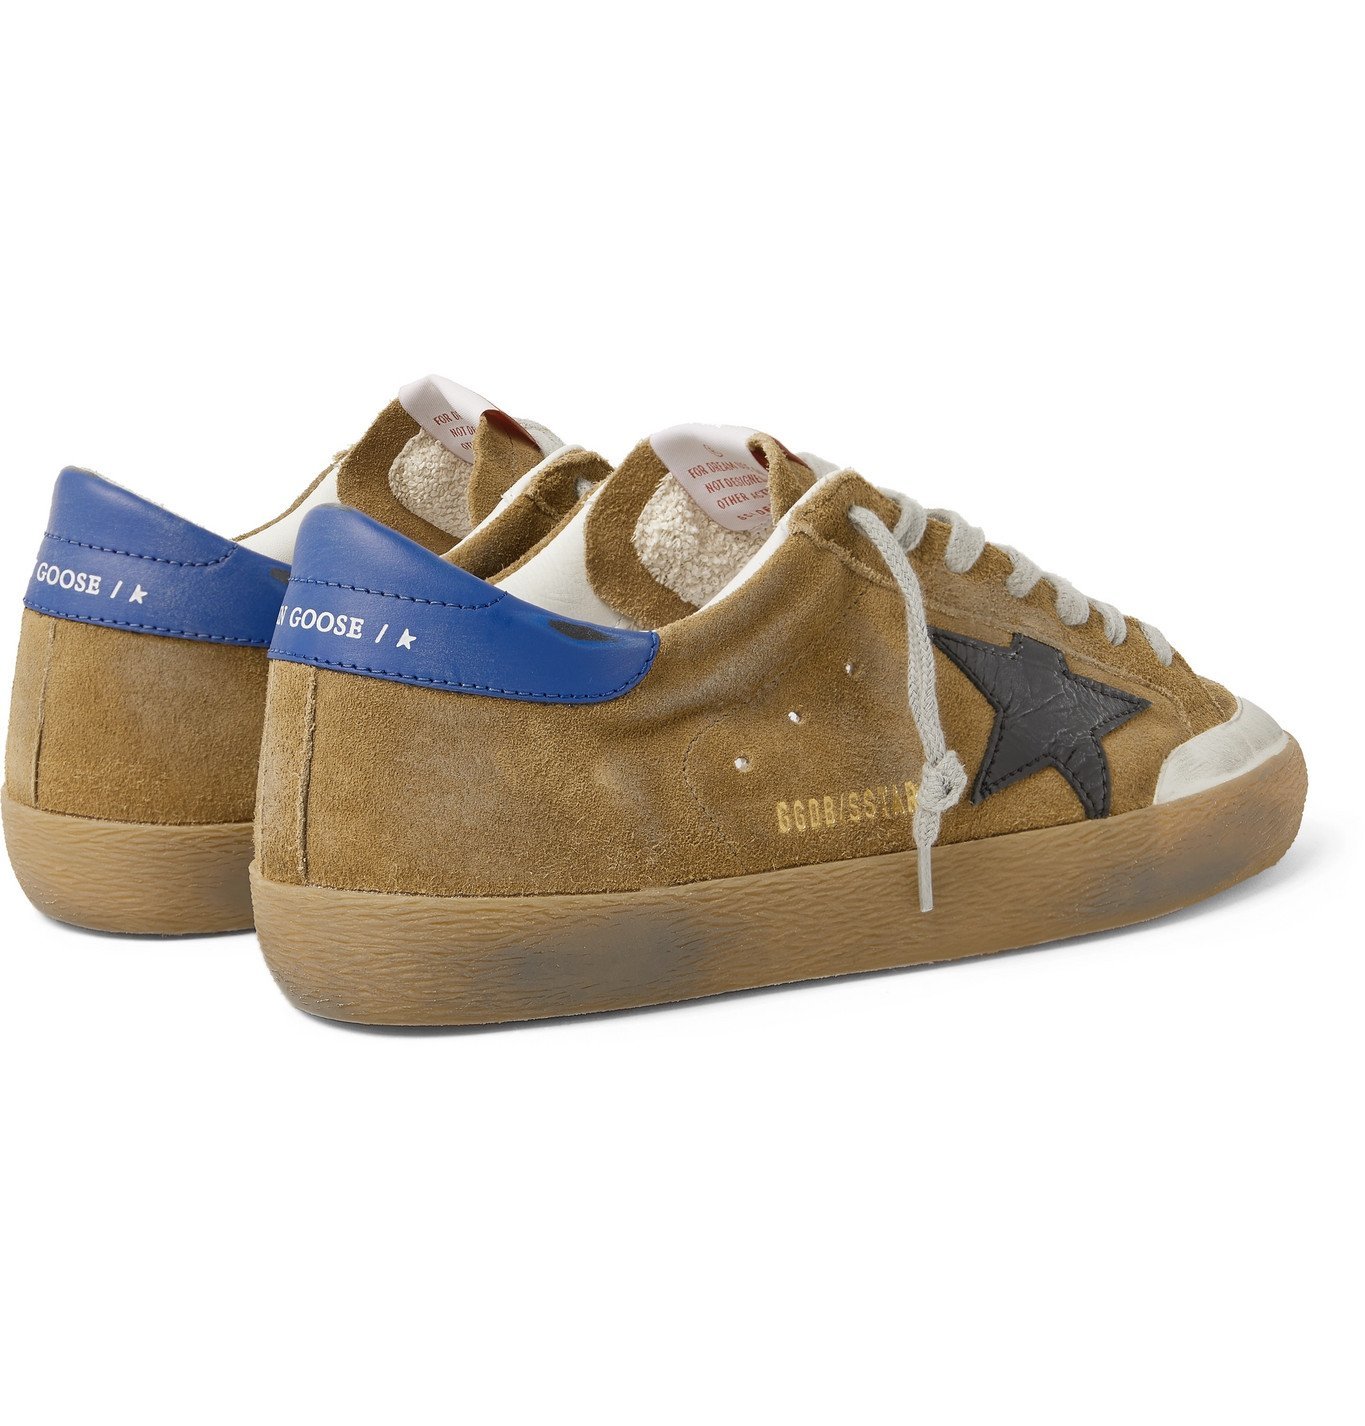 Golden Goose - Superstar Distressed Suede and Leather Sneakers - Brown ...